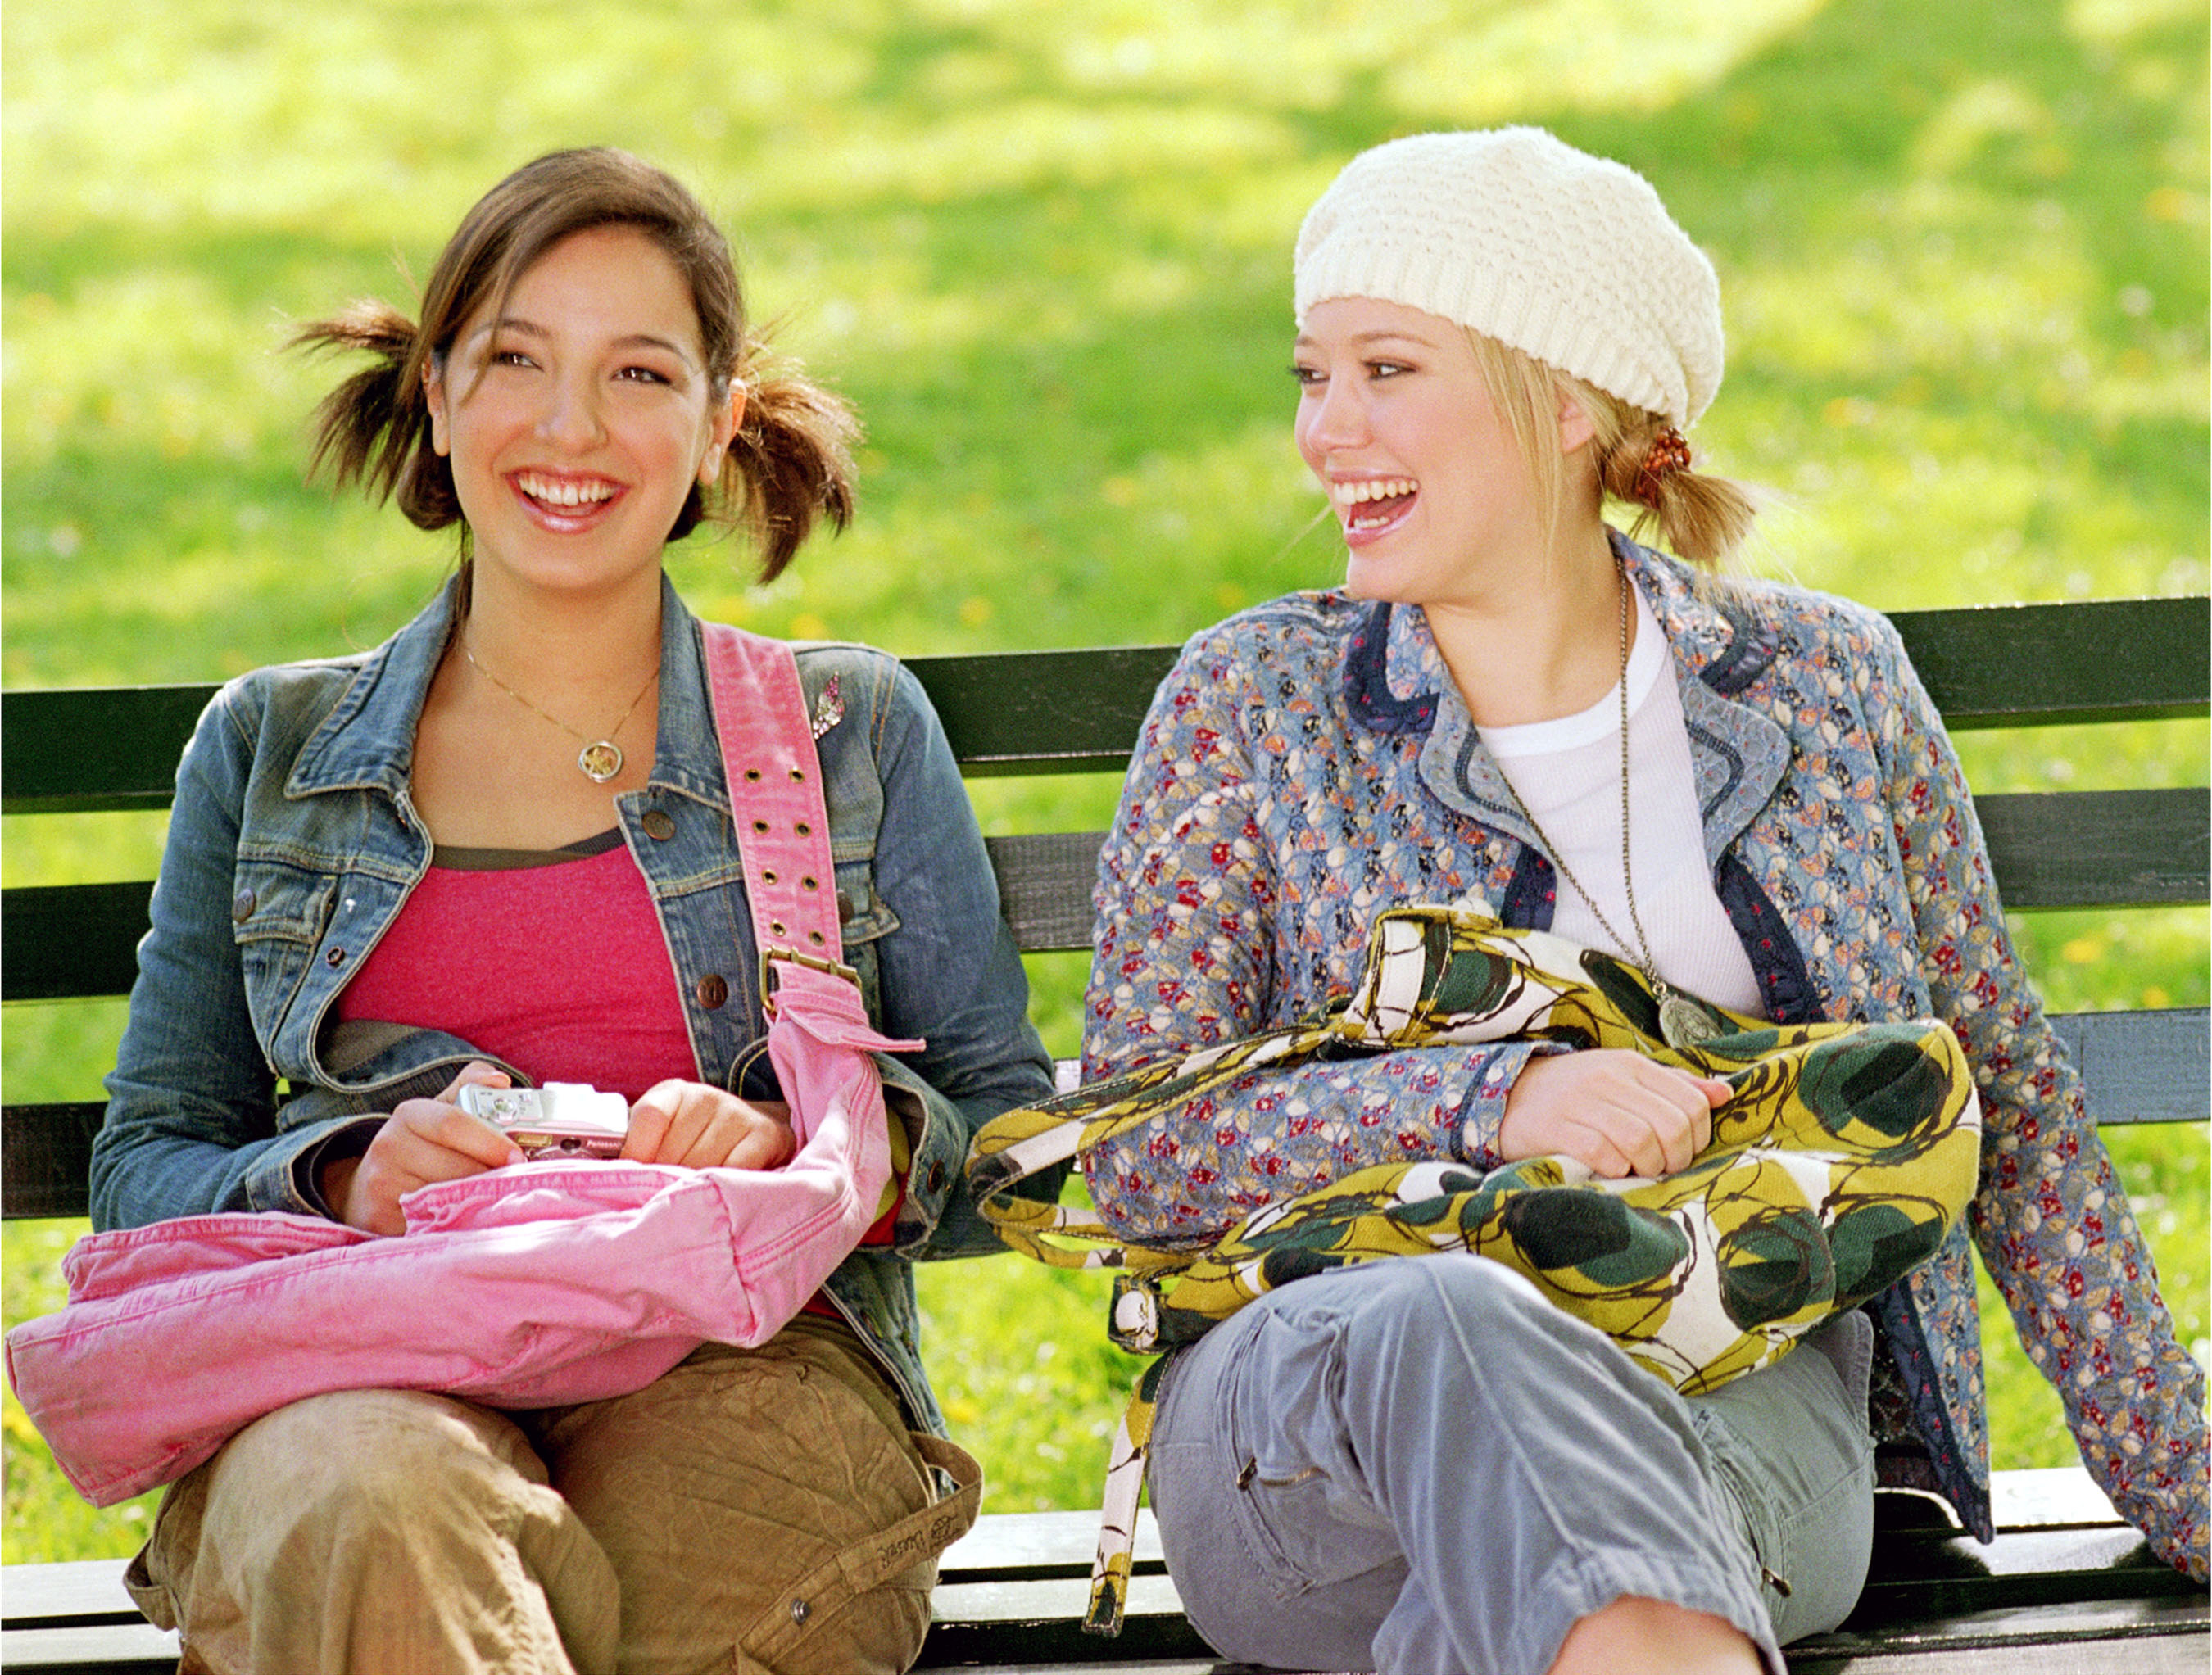 Two teens sit next to each other and laugh on a park bench.